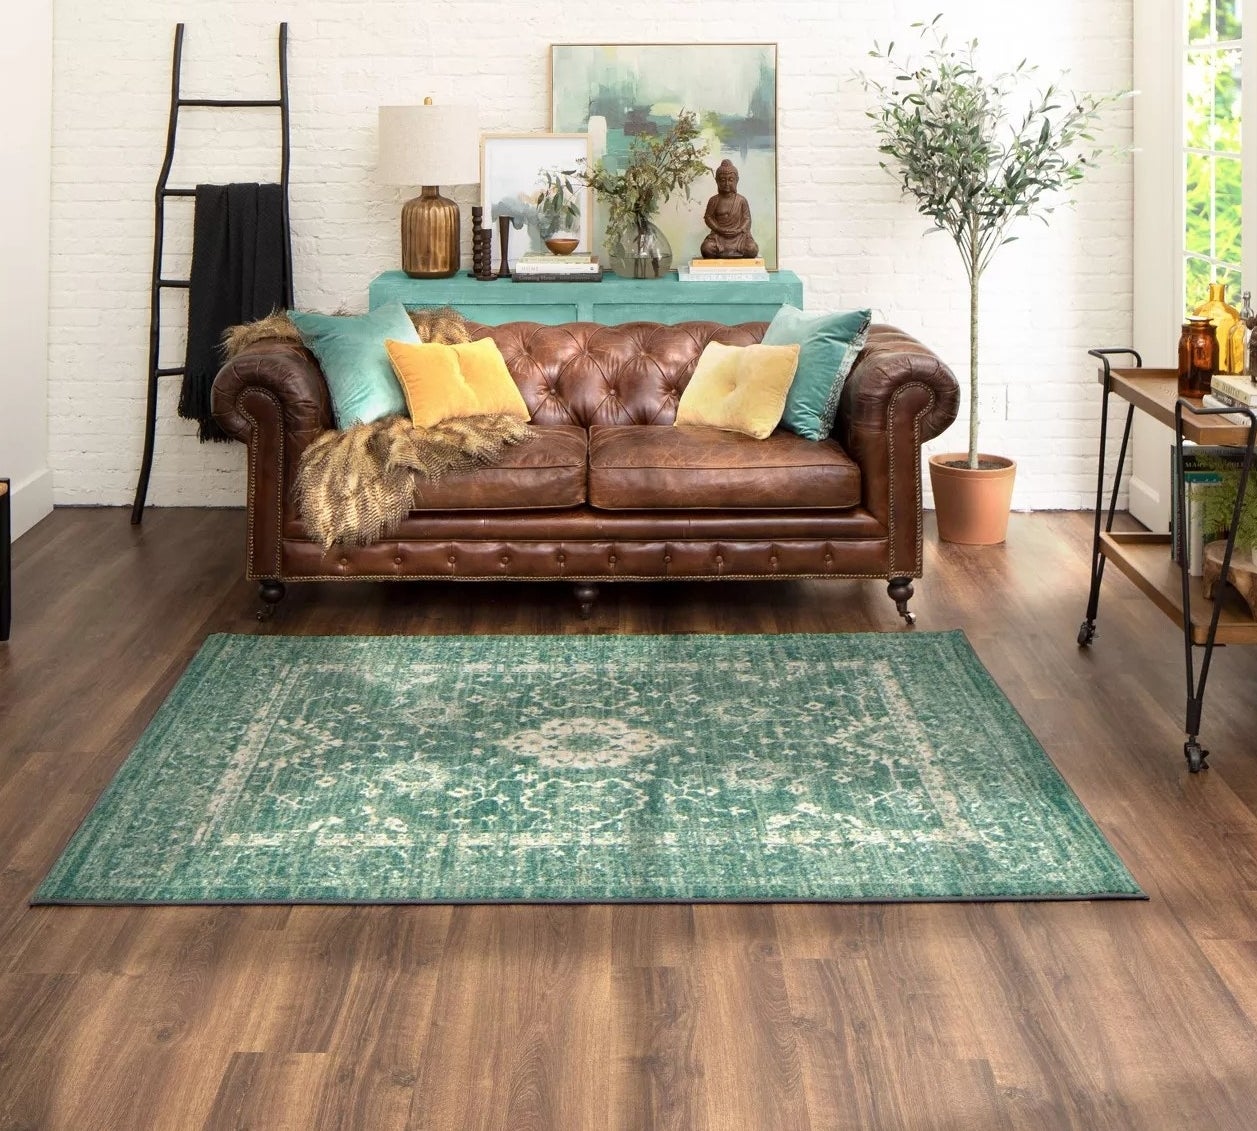 The green rug with a light floral pattern and distressed details in a living room